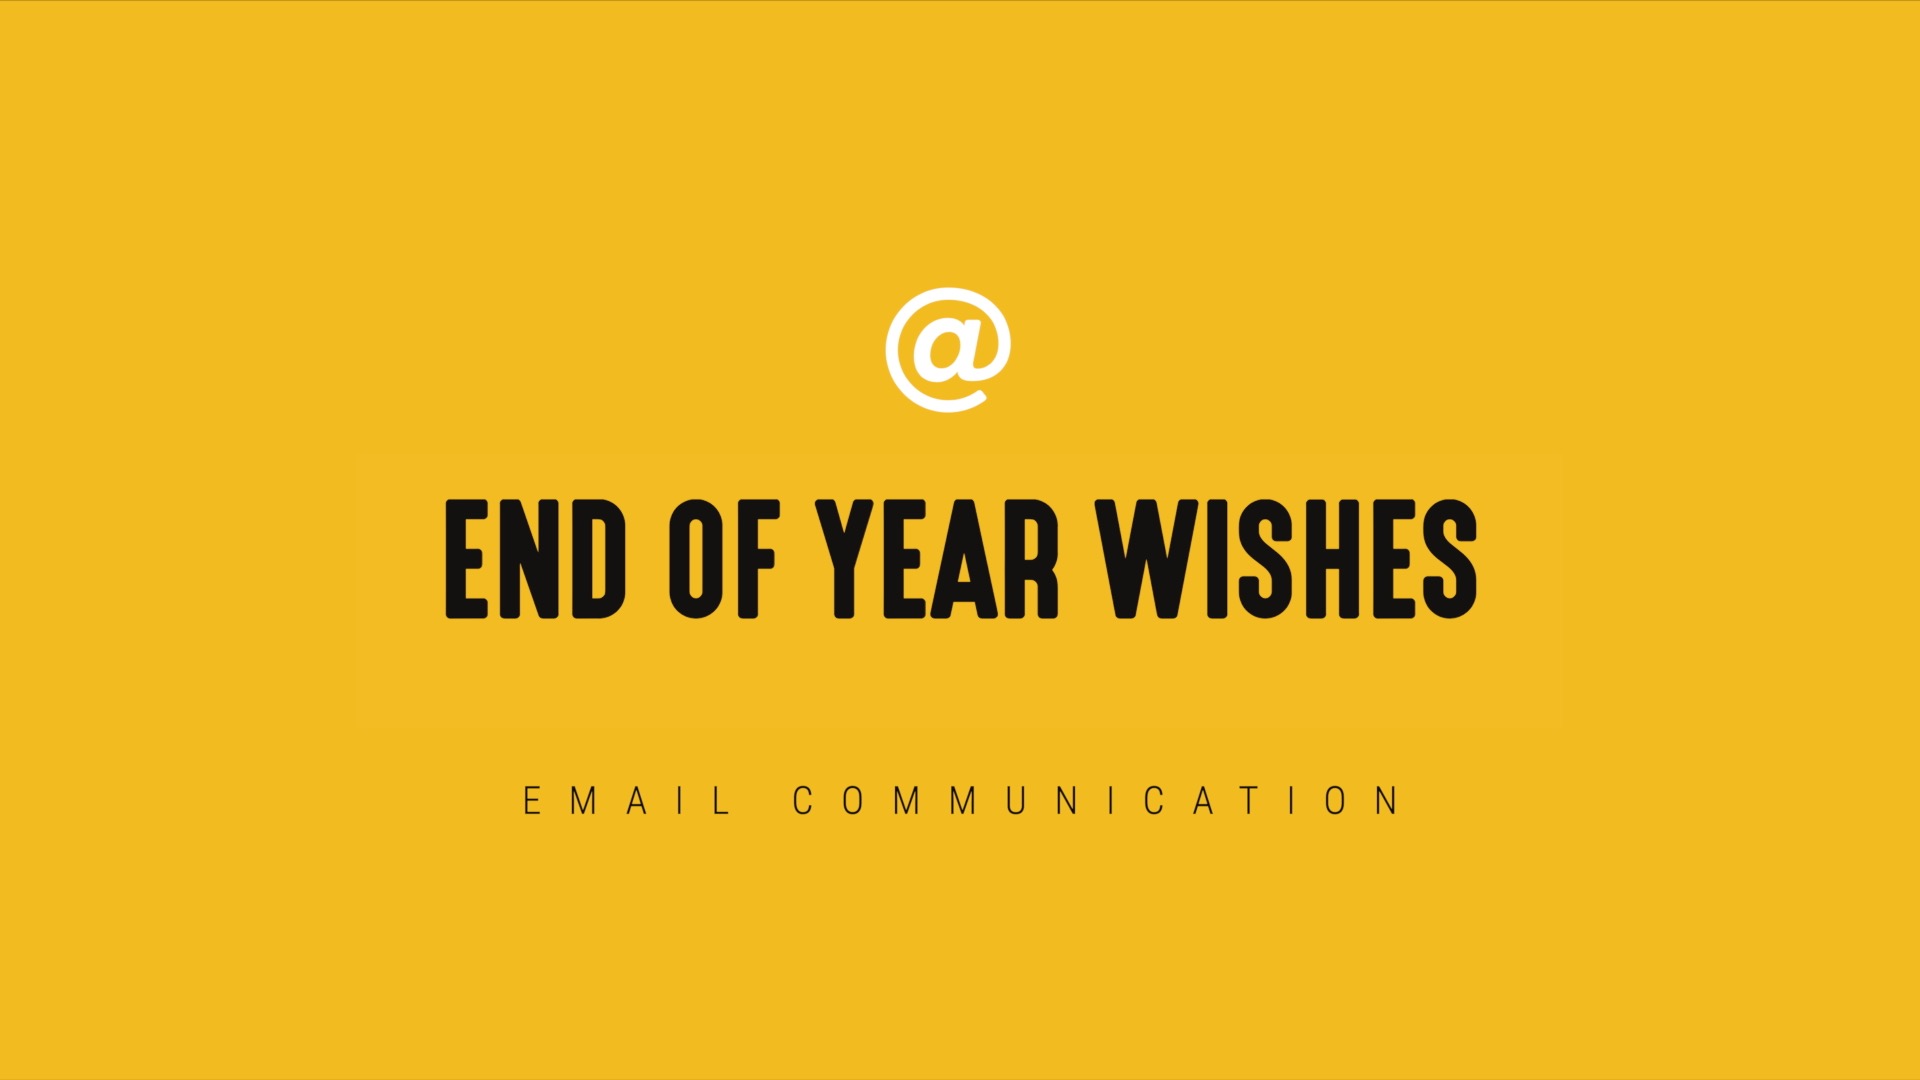 [NEW] Single-Topic Email | End of Year Wishes